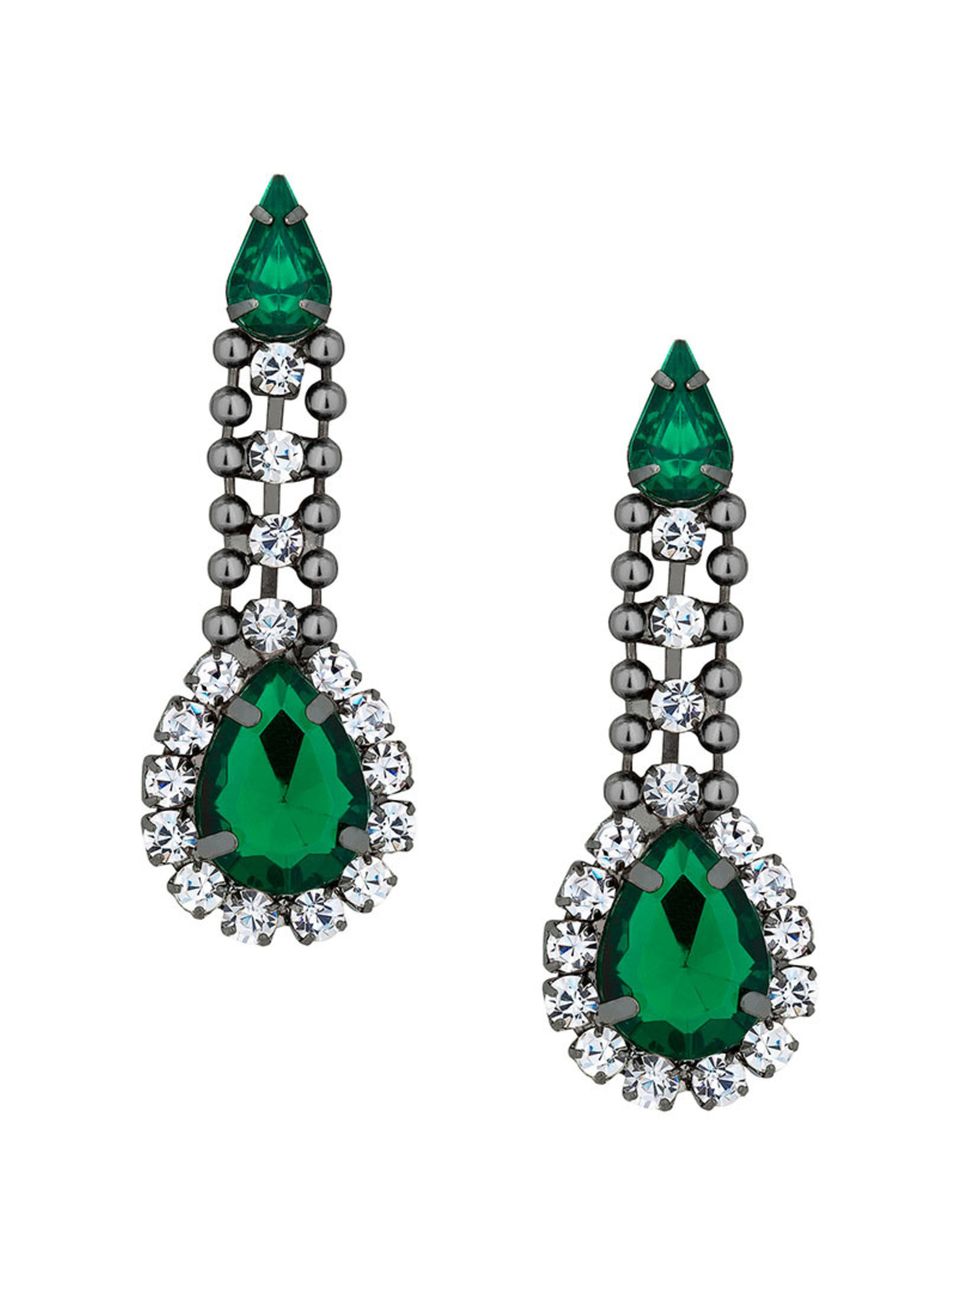 <p>Go emerald like Kate for a steal at £8.</p>

<p>Green peardrop earrings, £8, from <a href="http://www.debenhams.com/webapp/wcs/stores/servlet/prod_10701_10001_37484+MDER037430_-1" target="_blank">Mood at Debenhams</a>.</p>